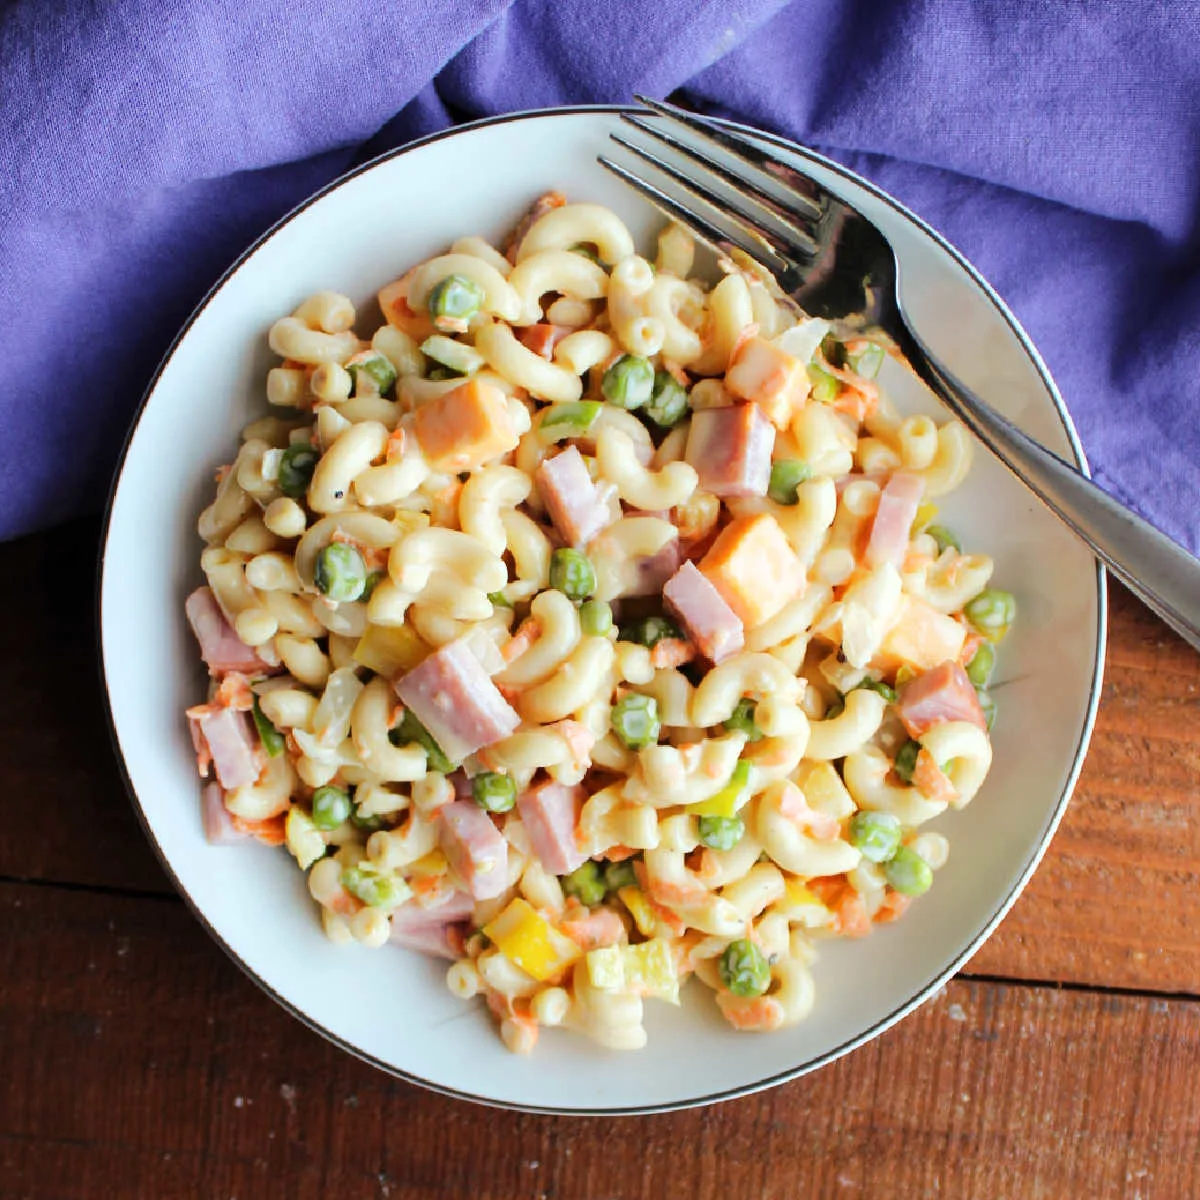 Lunch size portion of sweet pasta salad with peas, ham, cheese, onions, carrots, and peppers in a creamy tangy and sweet dressing with a fork, ready to eat.